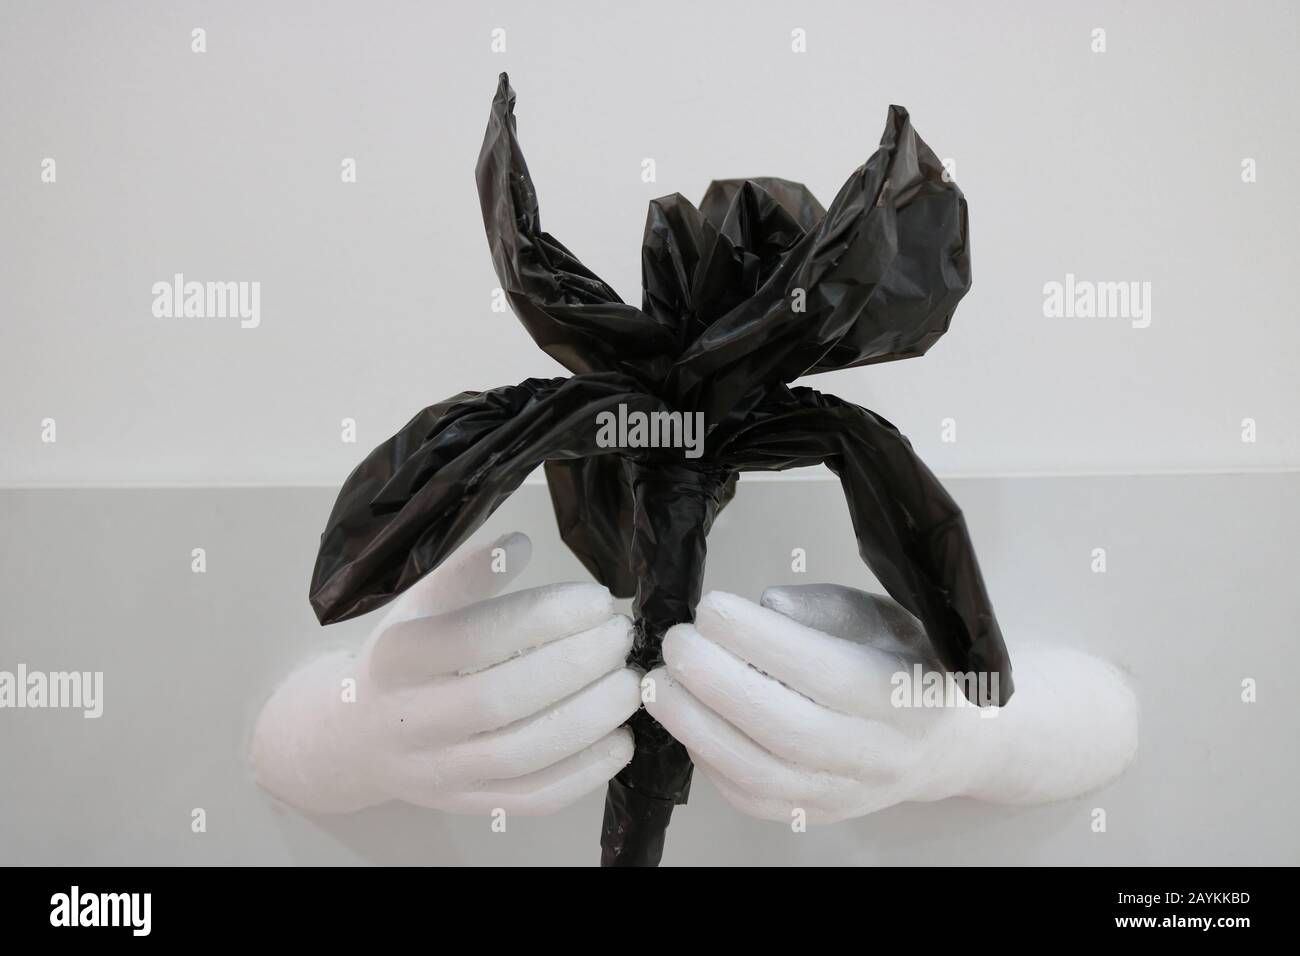 the black plastic bag was made as flower to increase awareness about this issue Stock Photo